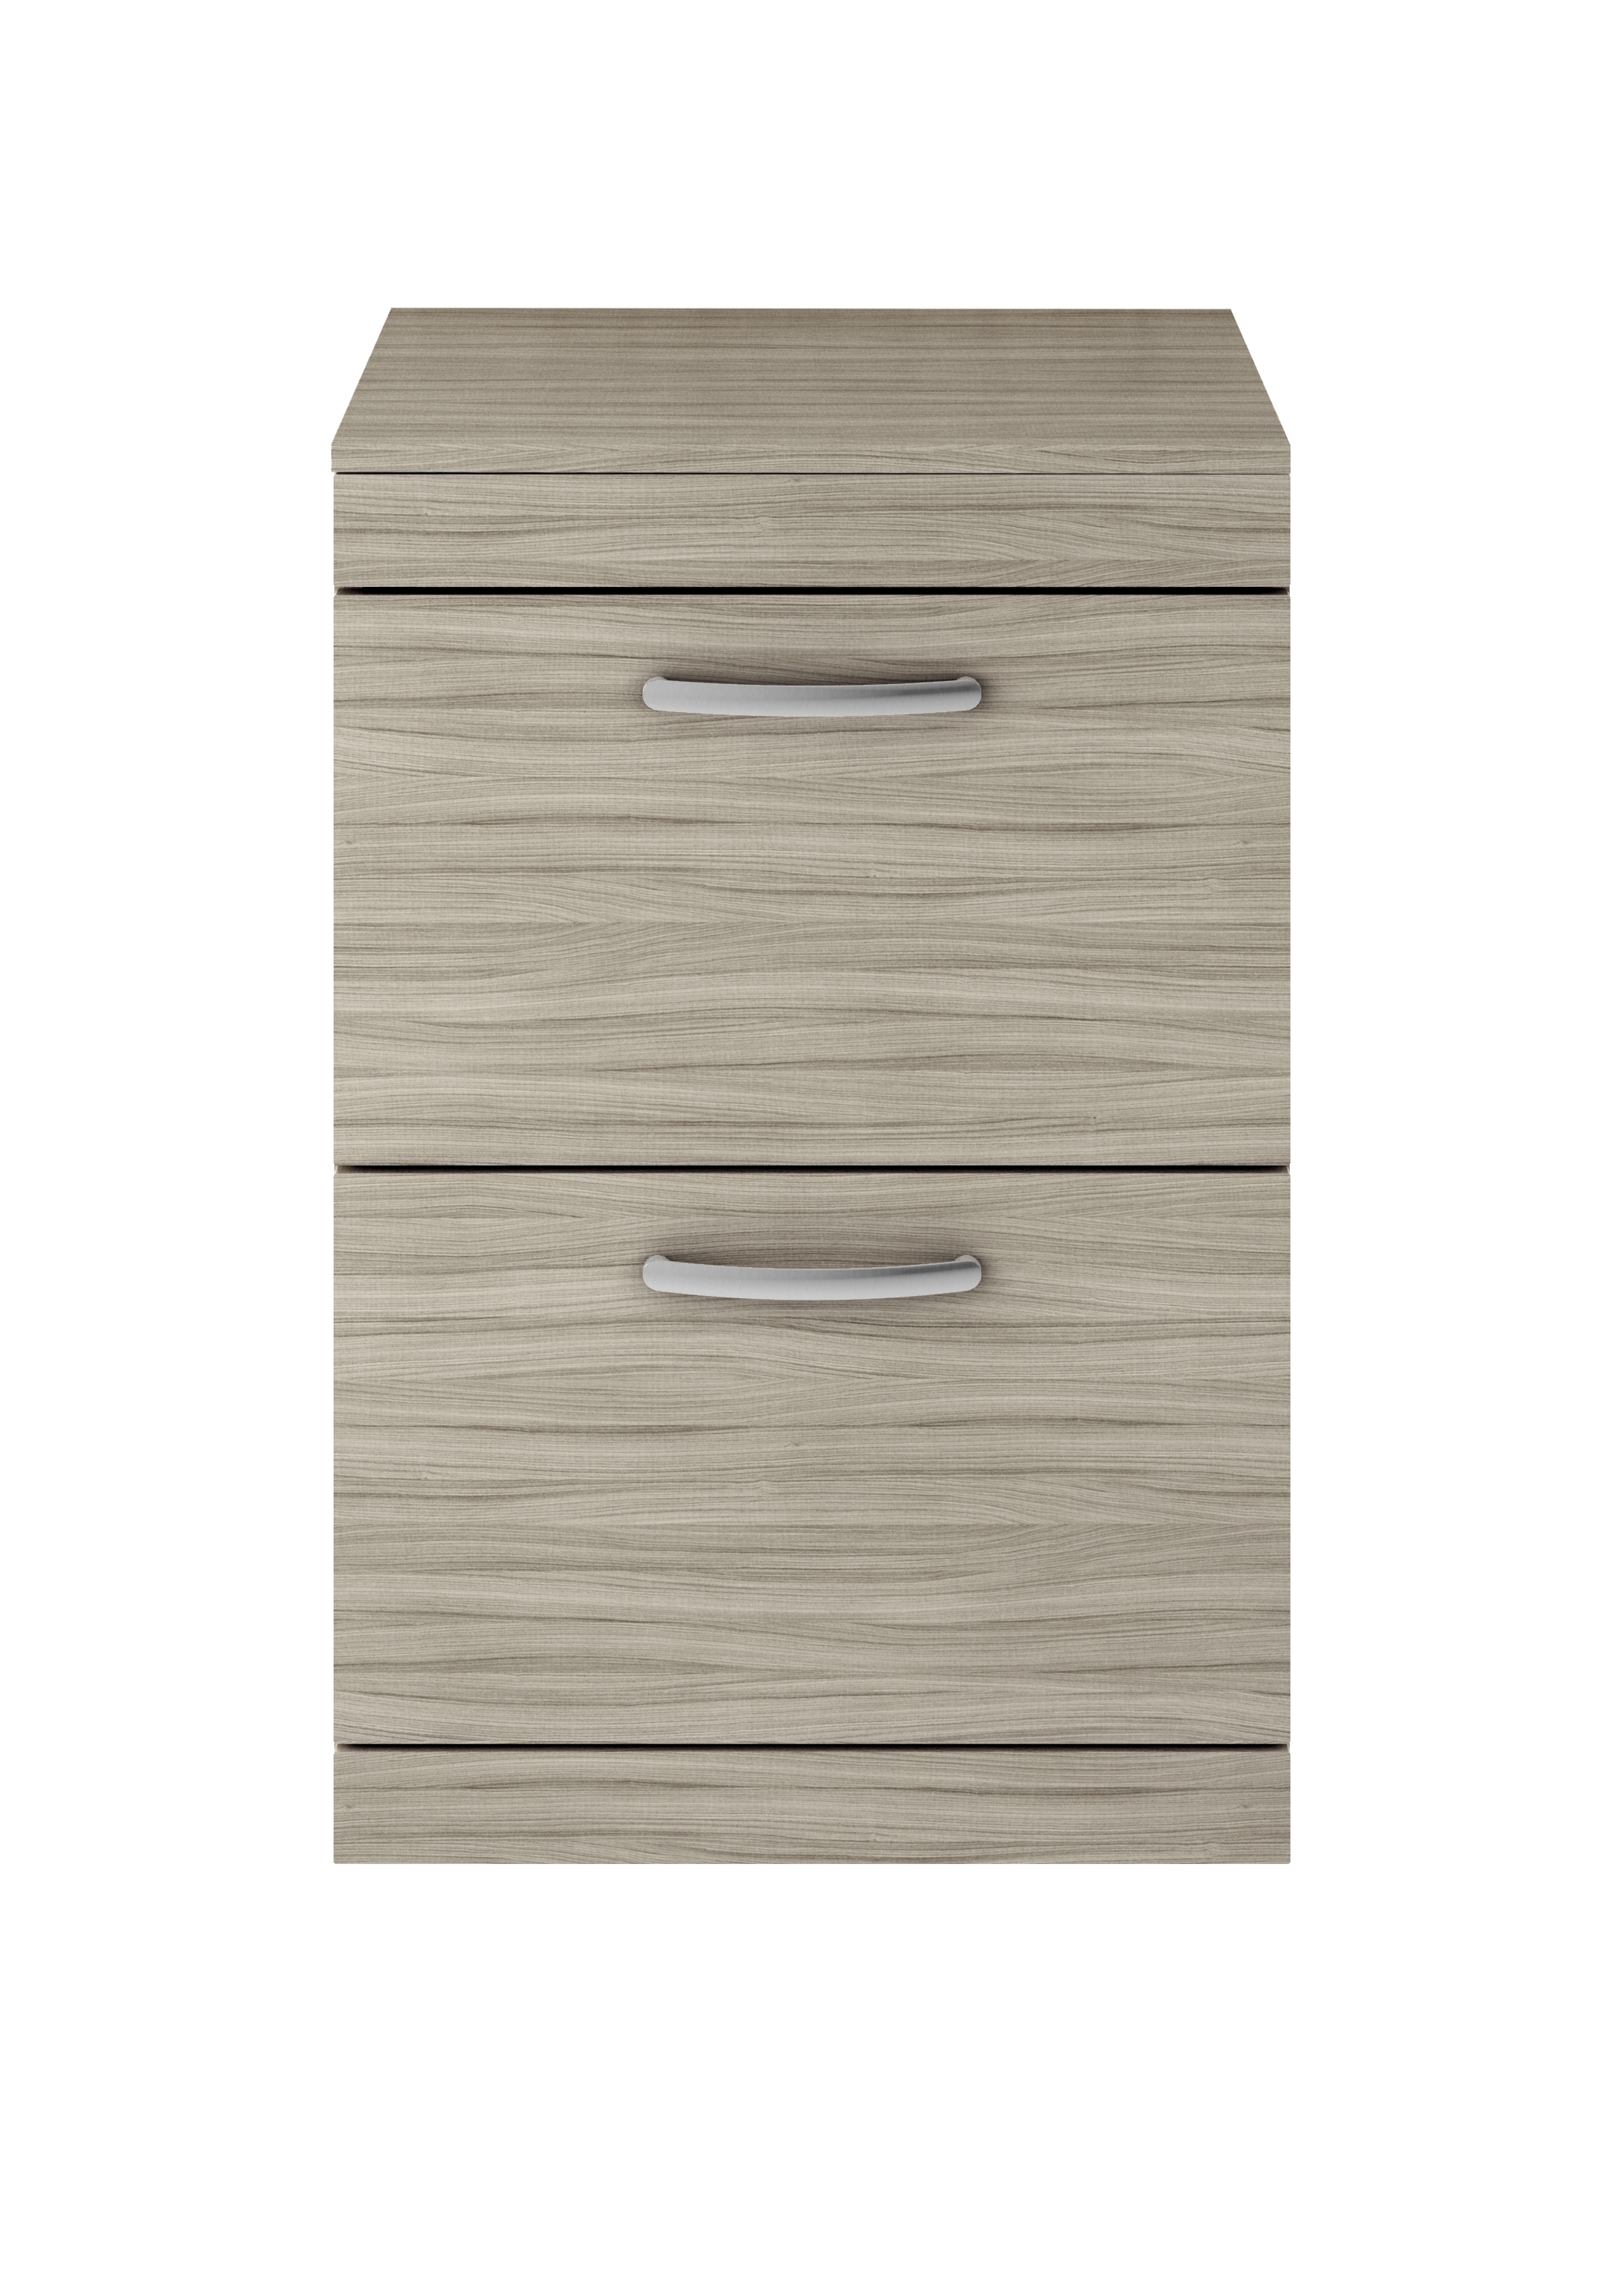 Nuie 2-Drawer Athena Floor Standing Vanity Unit and Worktop 600mm Wide - Driftwood - ATH029W 